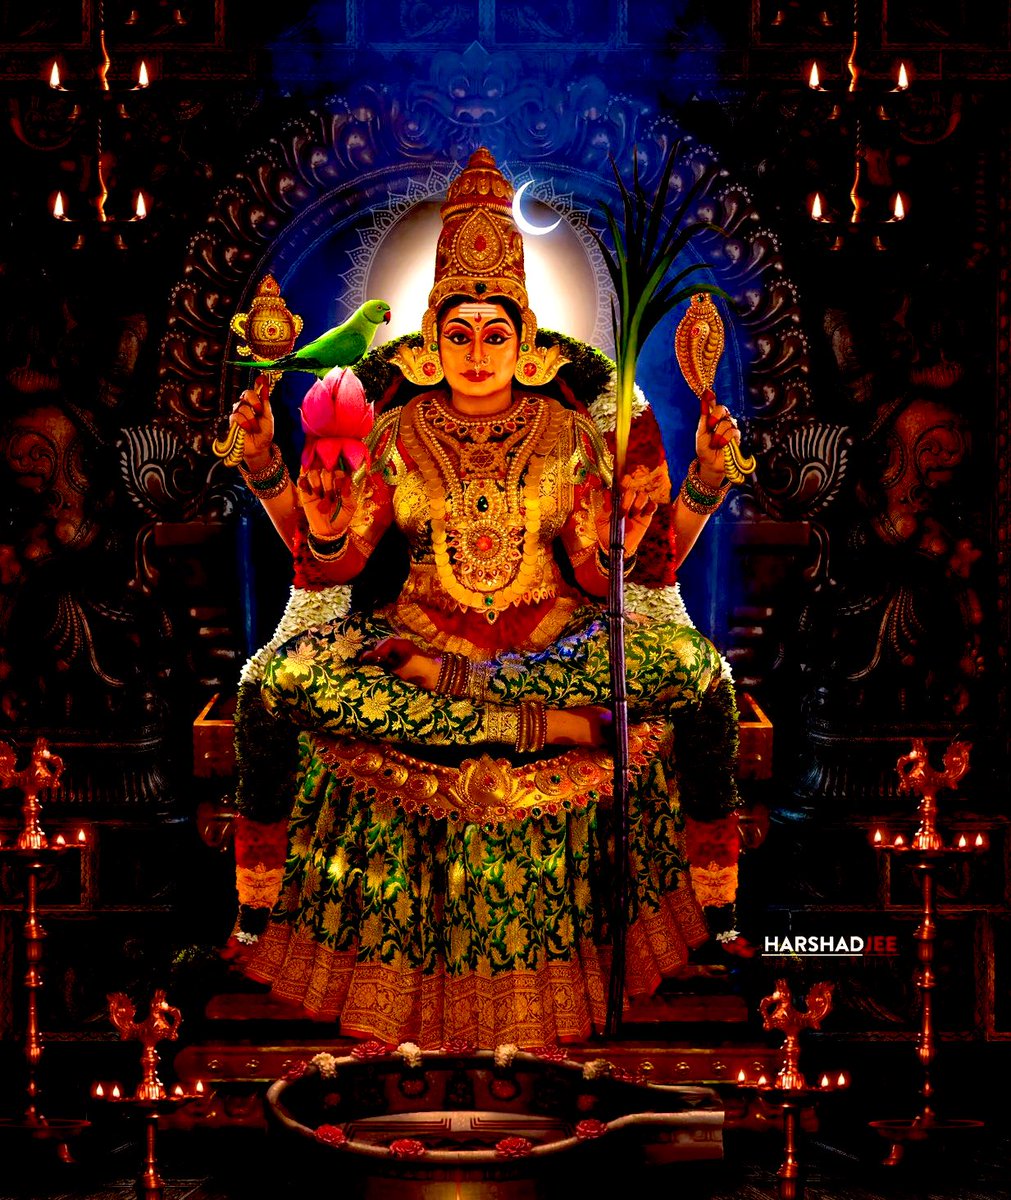 Meenakshii Devi is one of the 3 deites known as akshitrayii , meaning  the other 2 being Kamakshii & Visalakshii. She is the 3rd eye of knowledge Green color of #Meenakshiamman representing the grossness !! 

Meenakshi- The women with beautiful eyes like those of fish